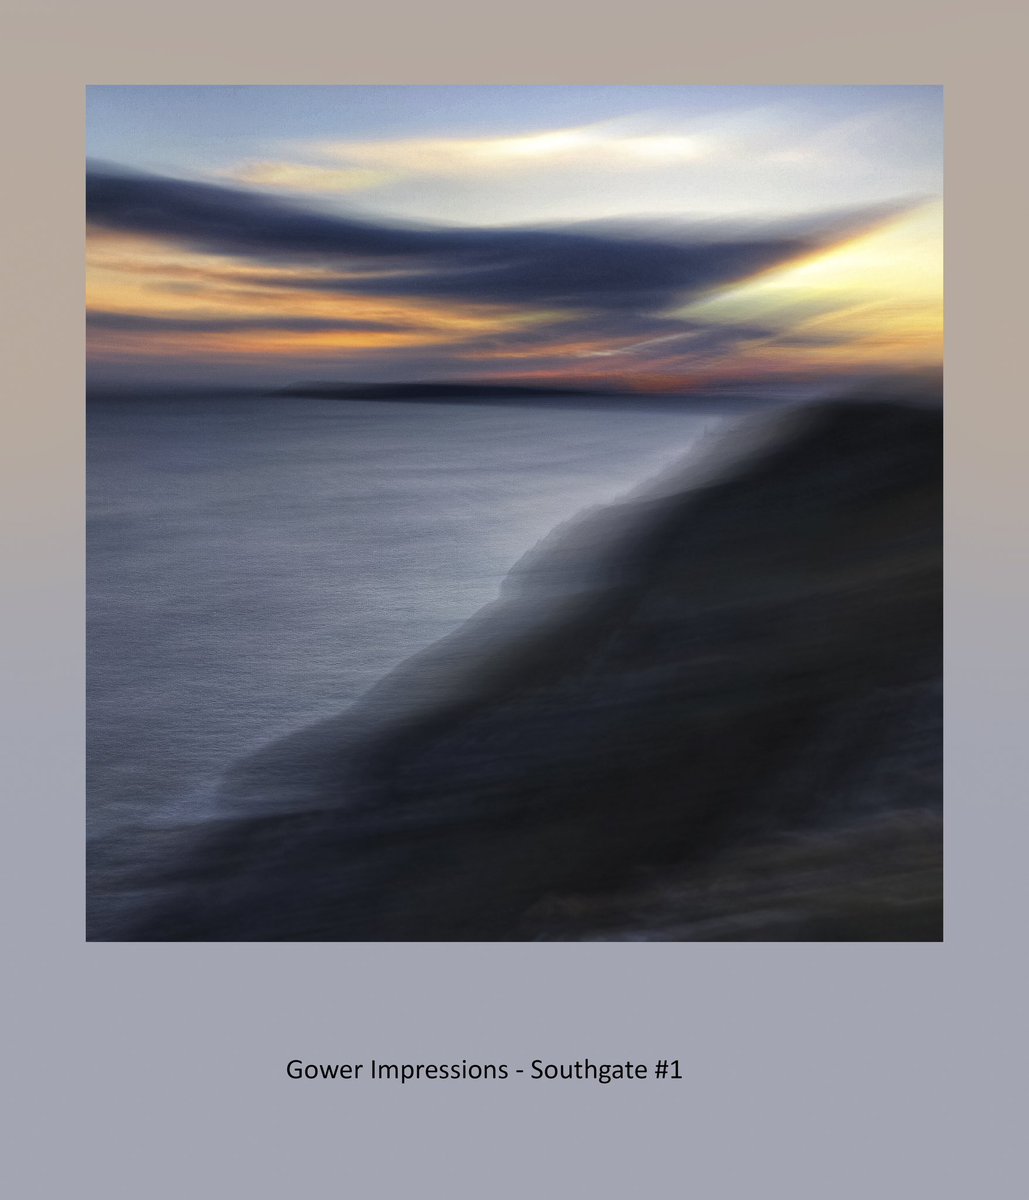 sunset off the southern cliffs of #Gower at #Southgate 

… from my series ‘Gower Impressions’

#photography #photographer #beautiful #art #iphone #icm #landscape #wales #coastandcountry #ThePhotoHour #coast #uk #sea #beach #lightandshade #sunset #horizon #waves #cliffs #clouds